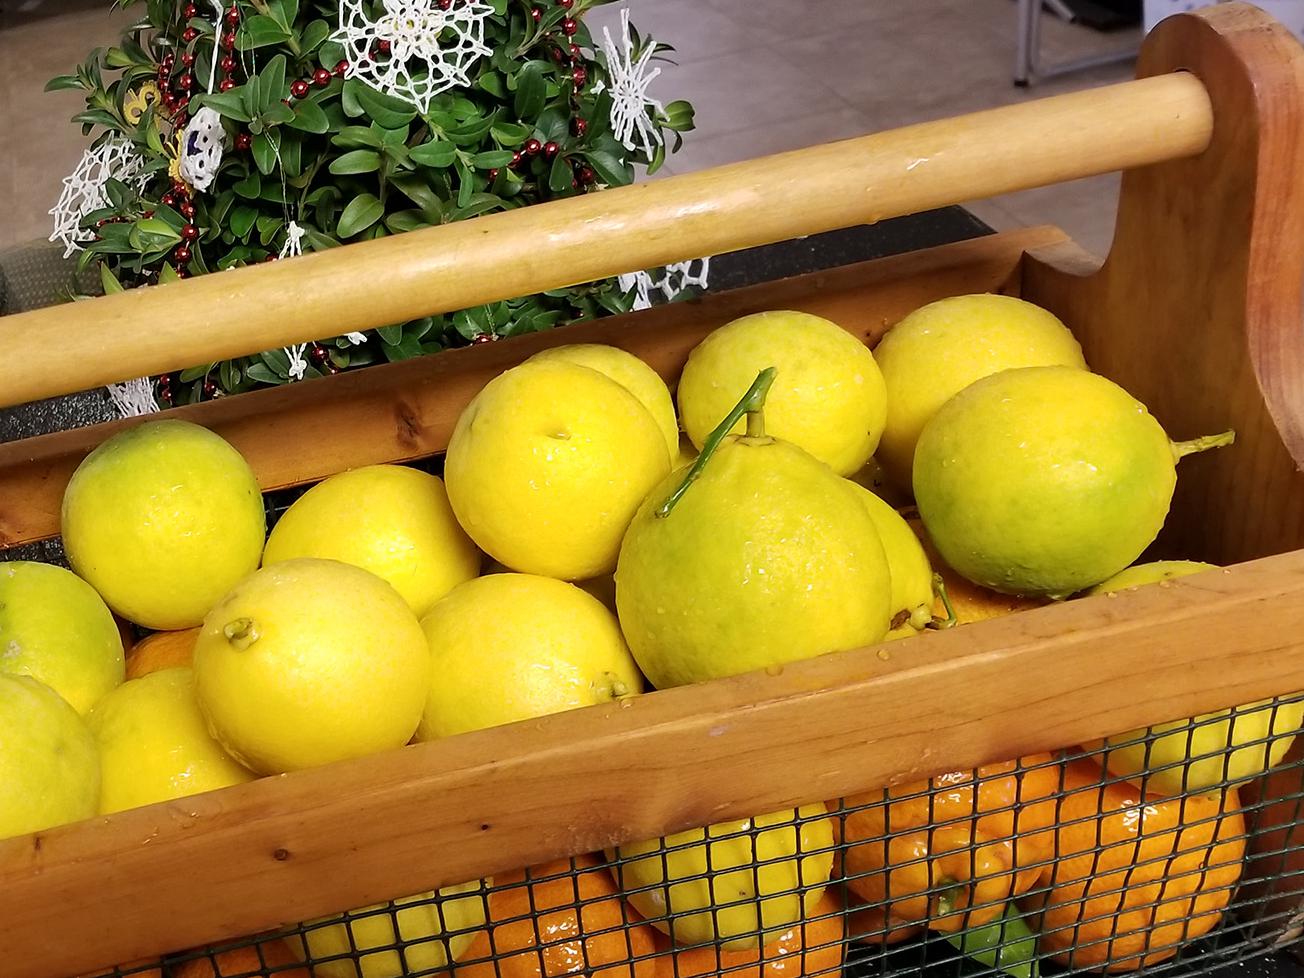 A wooden and wire basket full of yellow and orange fruit sits indoors with a Christmas tree in the background.